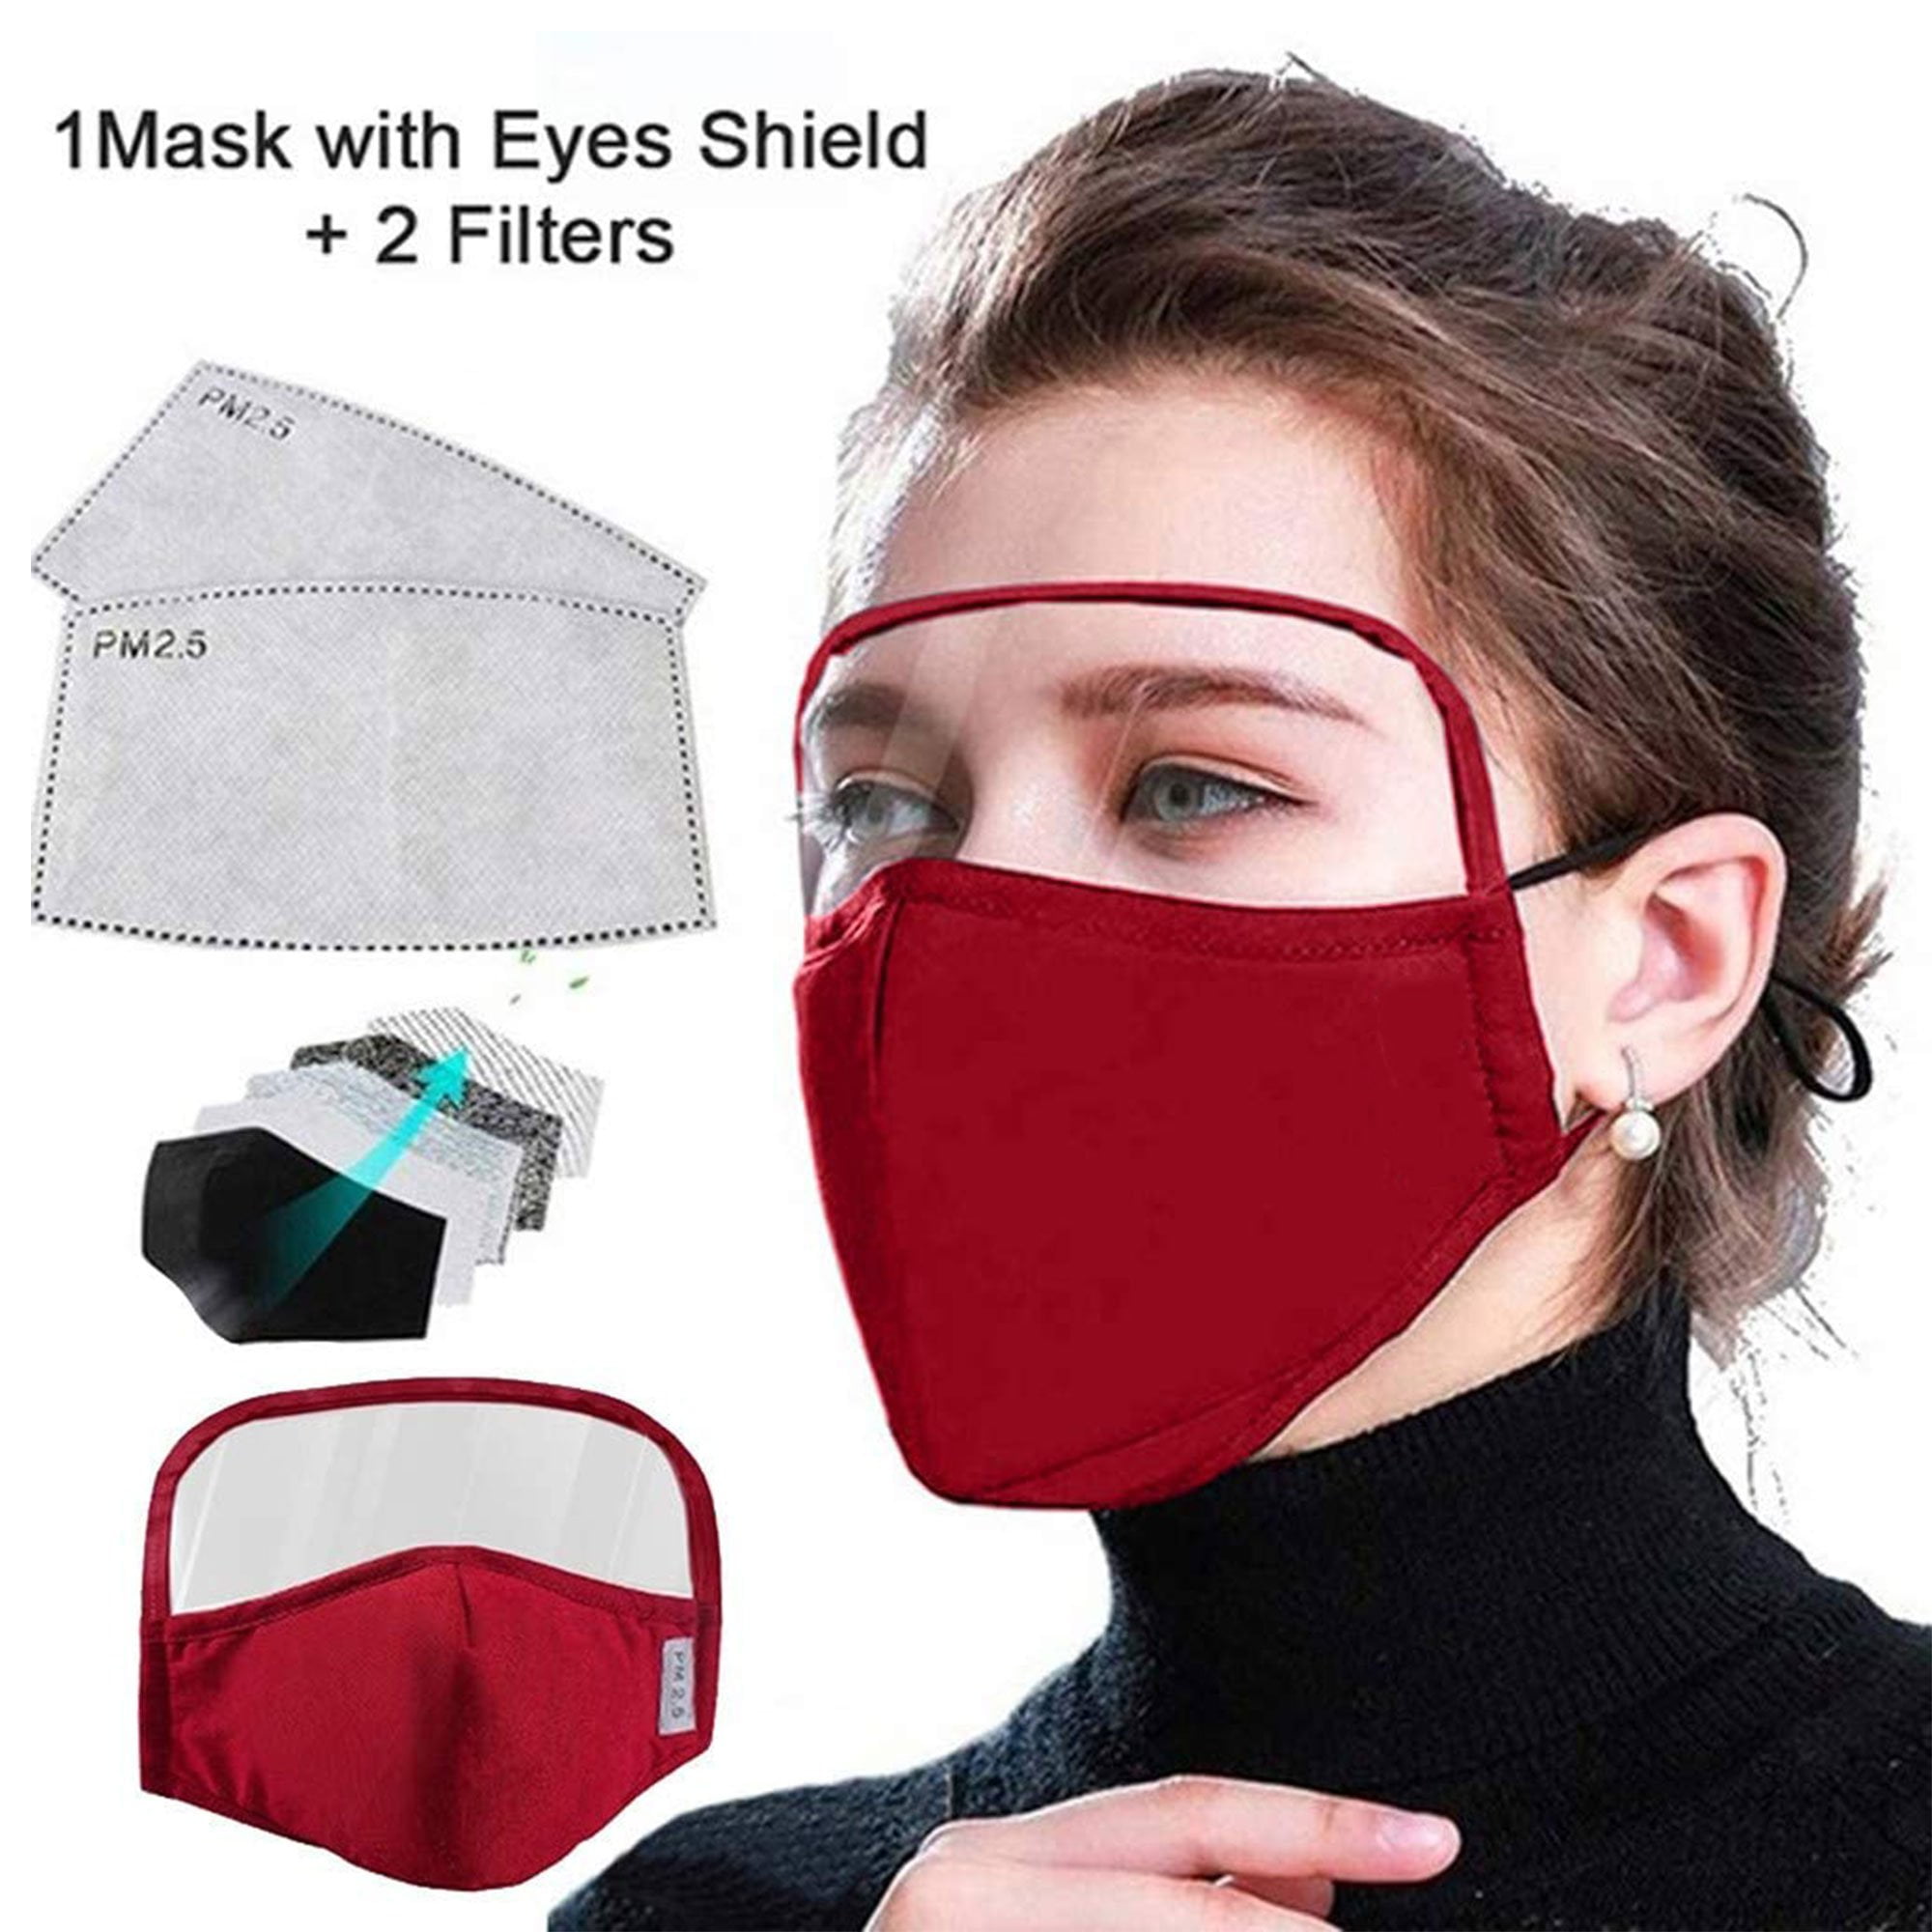 Details about   Reusable Cotton Face Nose Mask Washable Anti-Fog Cover with 2 Filters PM 2.5 USA 